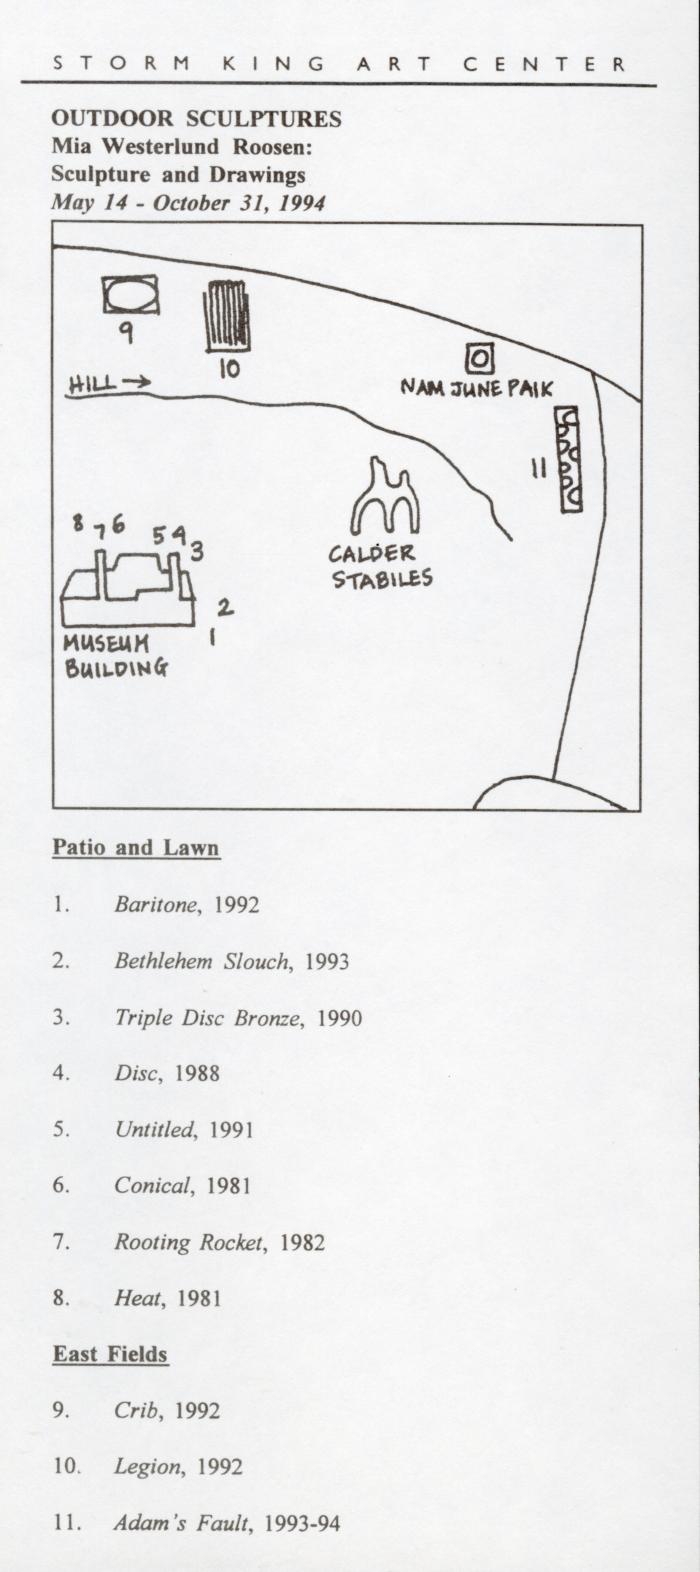 <i>Mia Westerlund Roosen: Sculpture and Drawings,</i> exhibition map, May 14 - October 31, 1994, Storm King Art Center